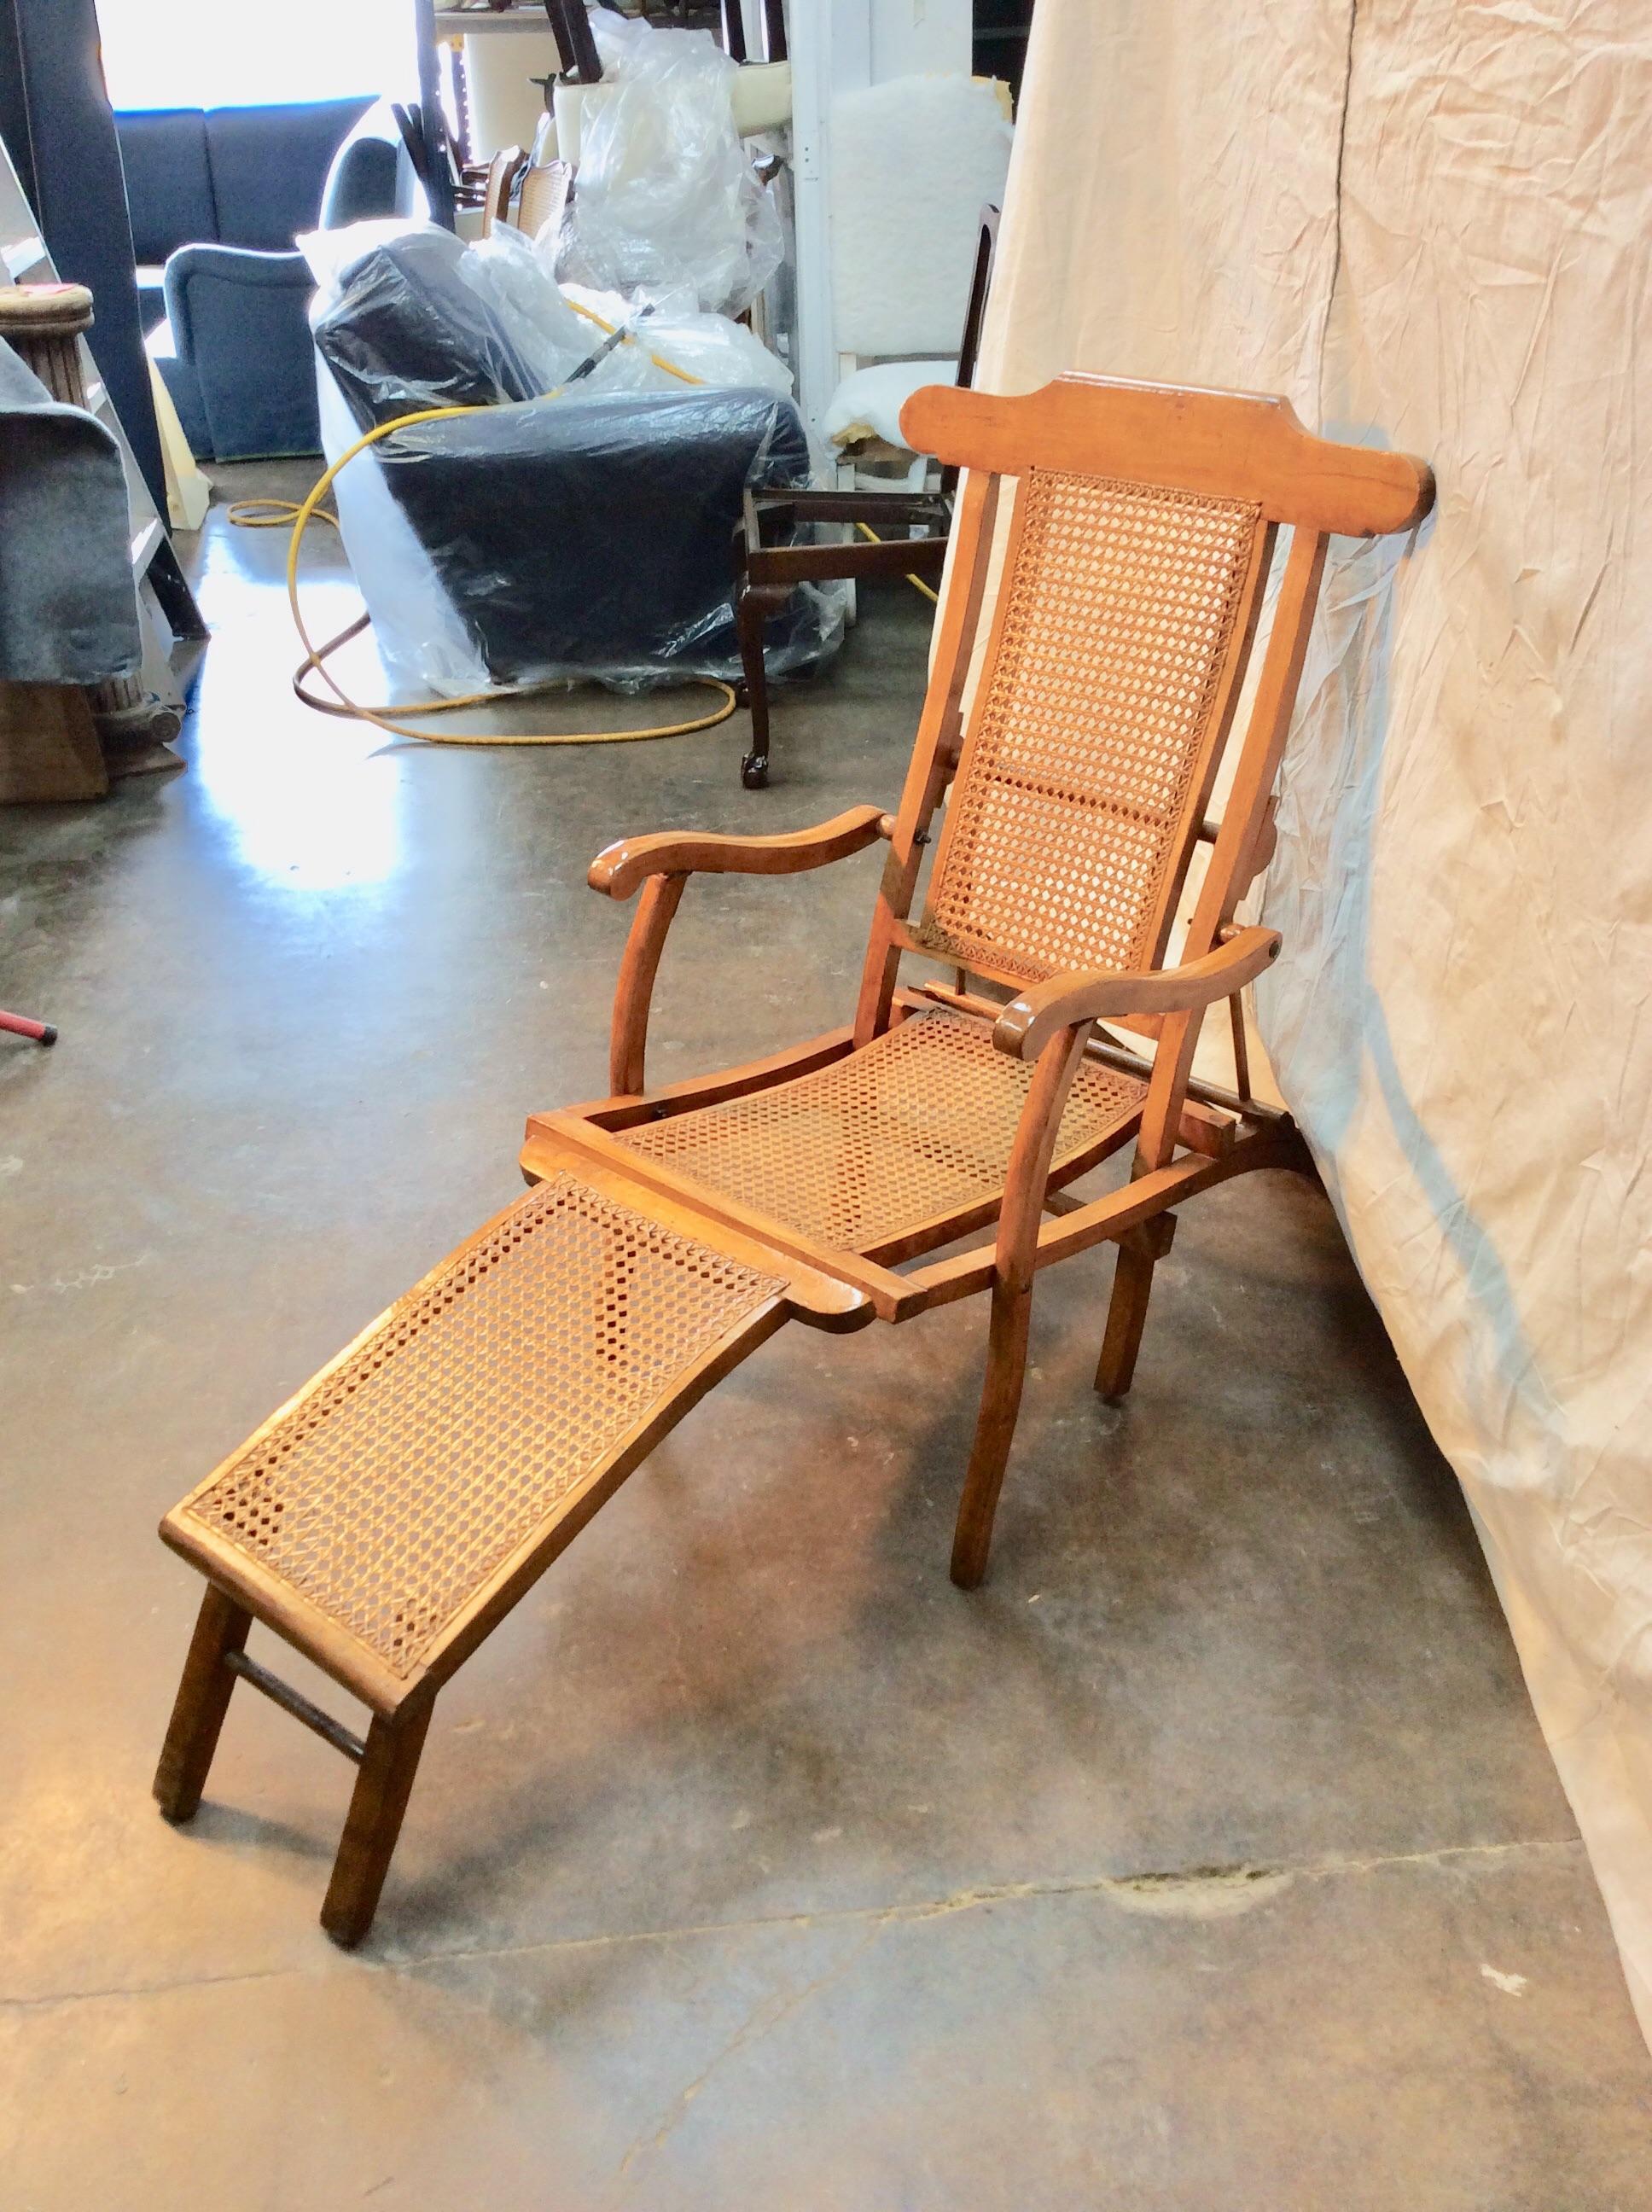 Found in the South of France, this stylish Early 1900s French Walnut and Cane Deck Chair was once used on steamer ships across Europe. The piece features a walnut frame with cane back and seat flanked by scrolling arms and splayed legs. Designed